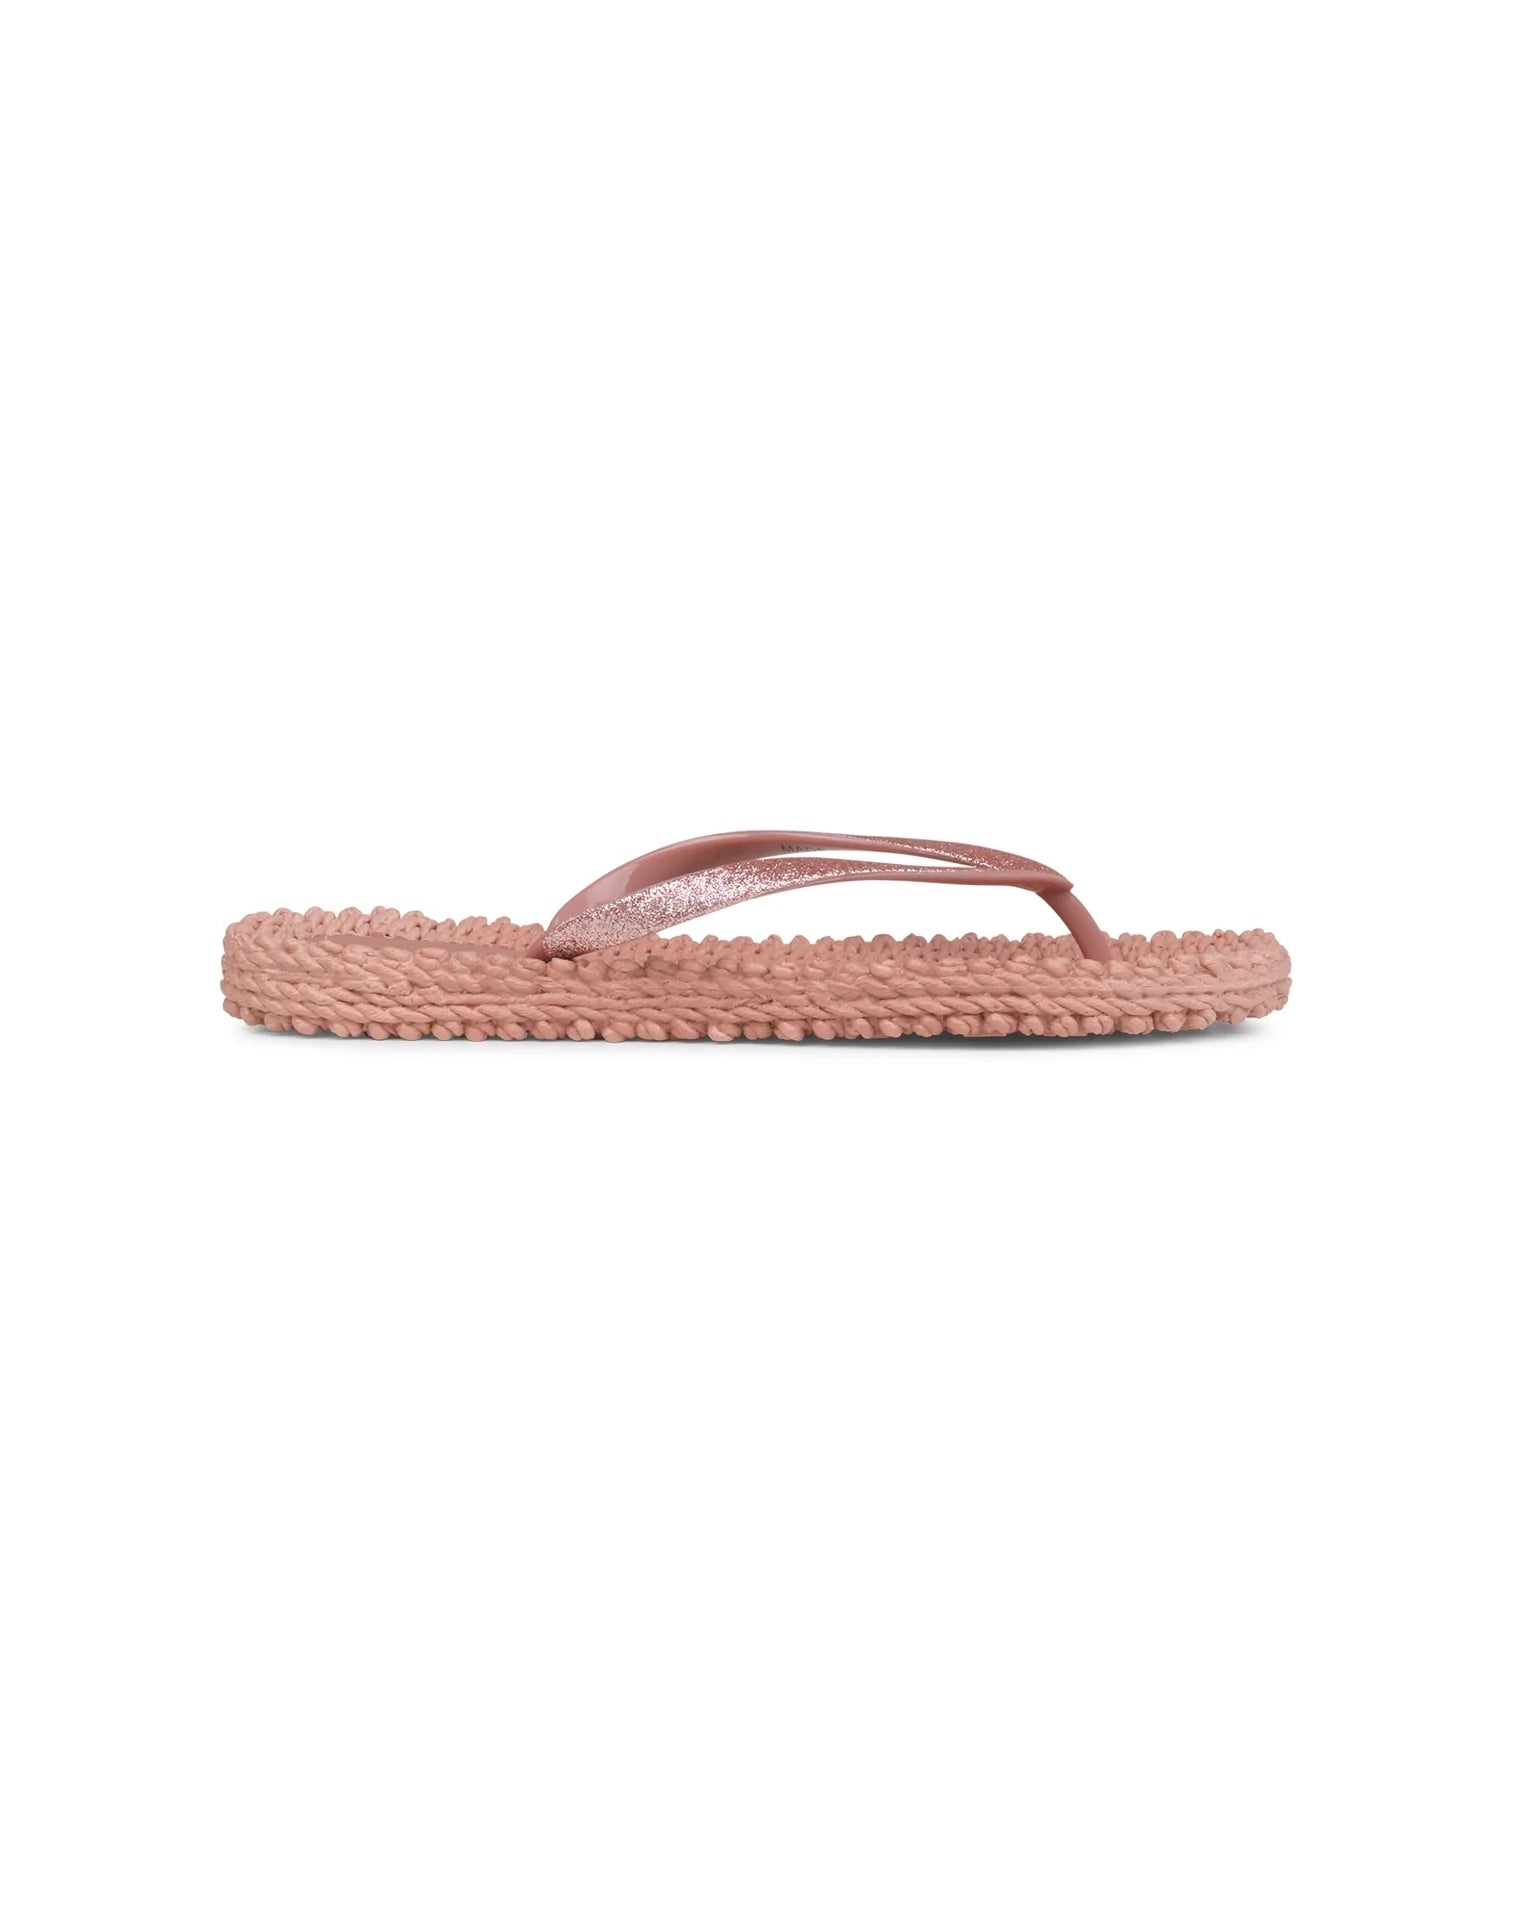 Ilse Jacobsen Cheerful Flip Flop with Glitter - Misty Rose